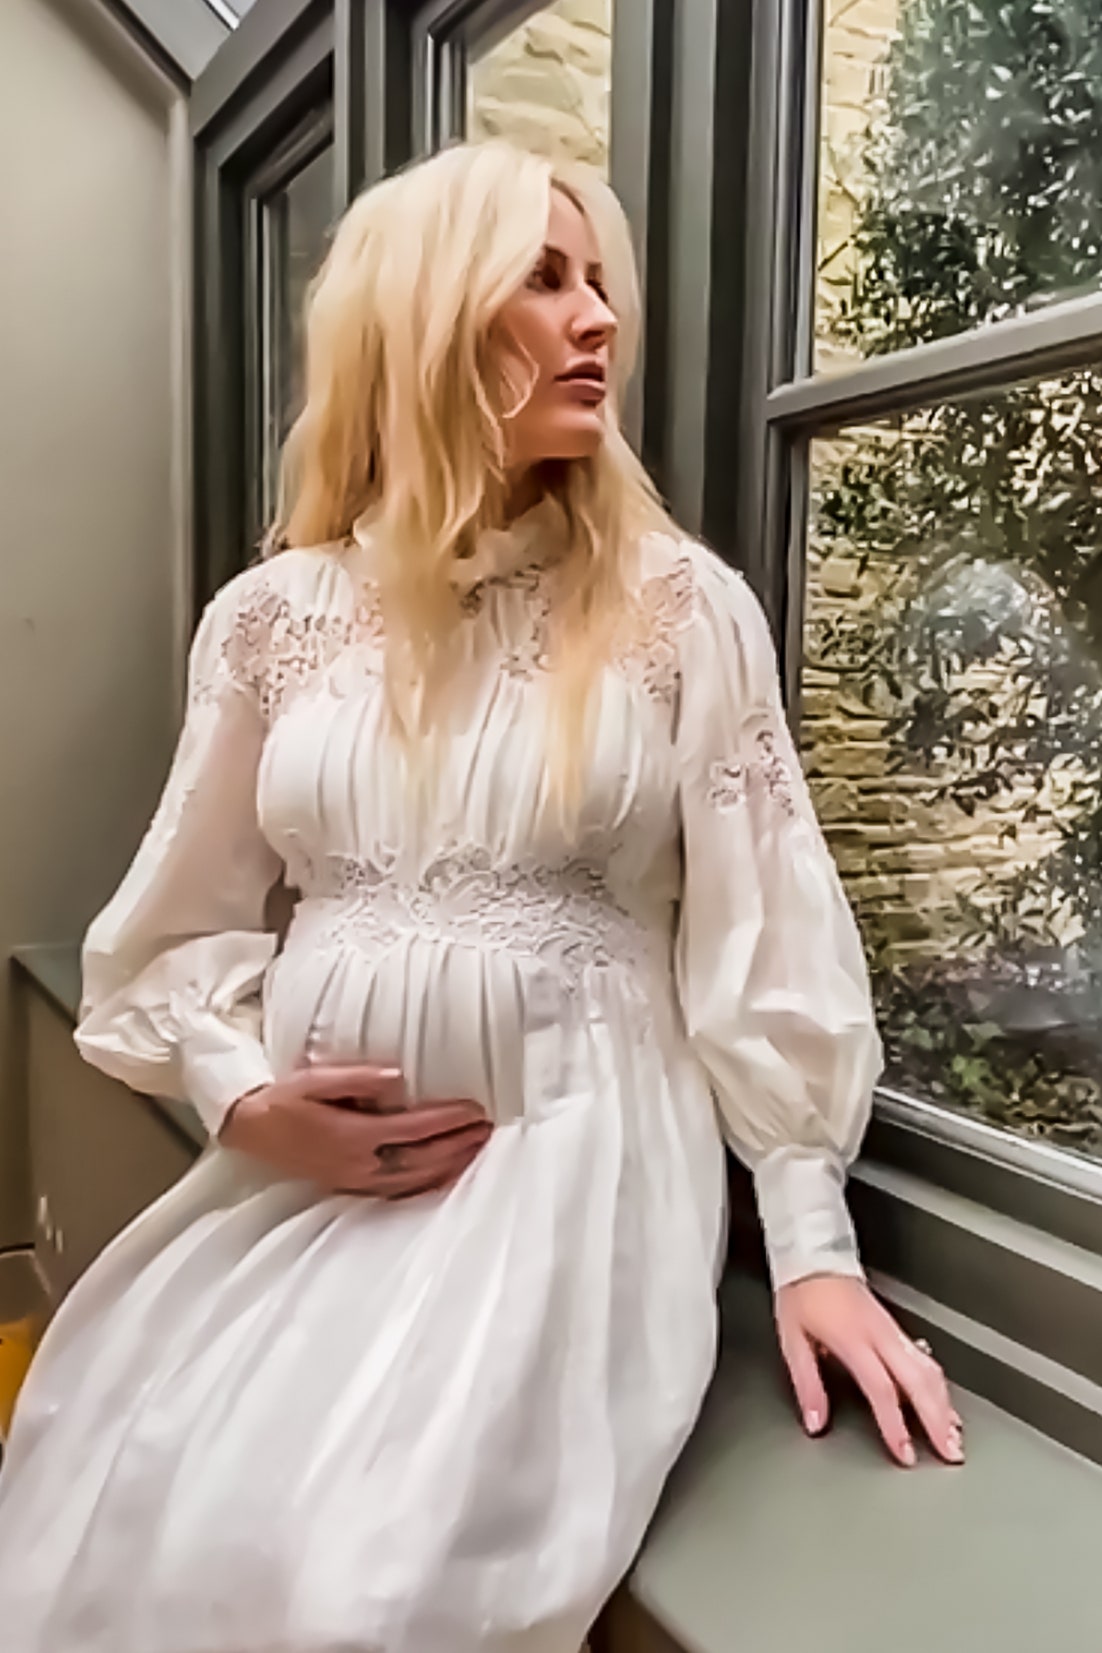 Ellie Goulding pictured at her home in Gloucestershire wearing a linen lace dress from the Alberta Ferretti Spring 2021...